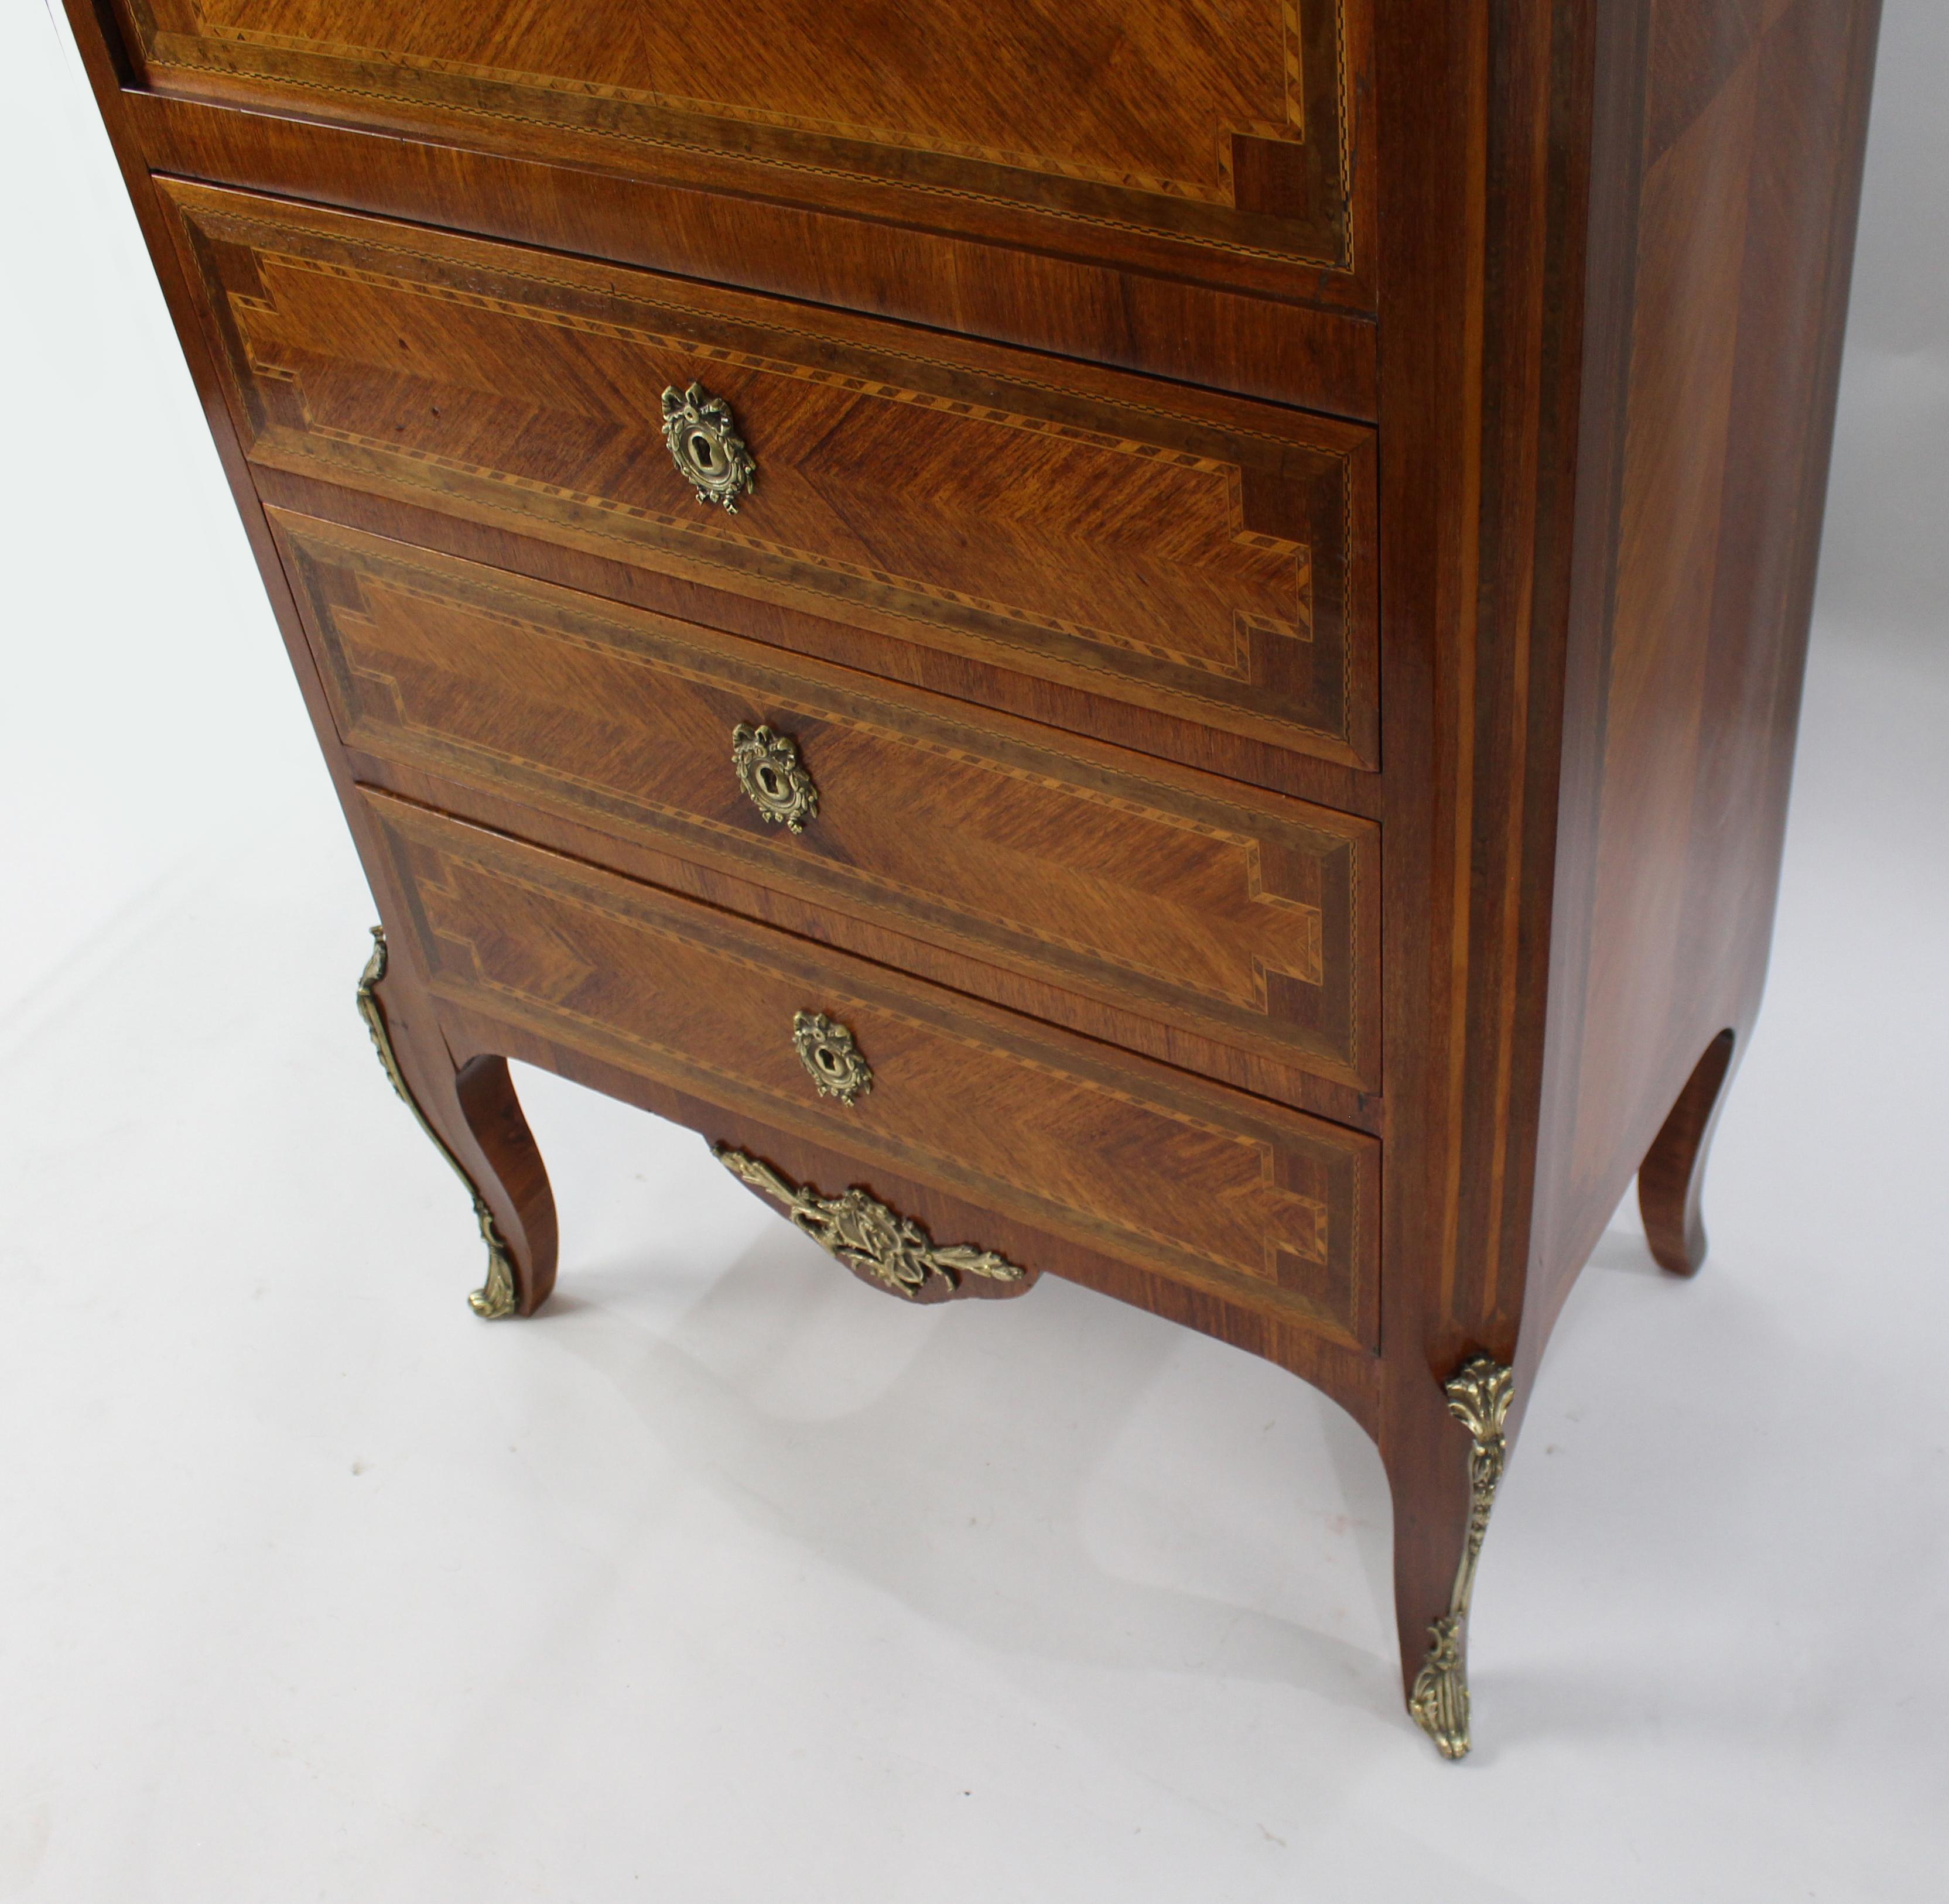 19th c. French Marble Topped Inlaid Escritoire For Sale 4